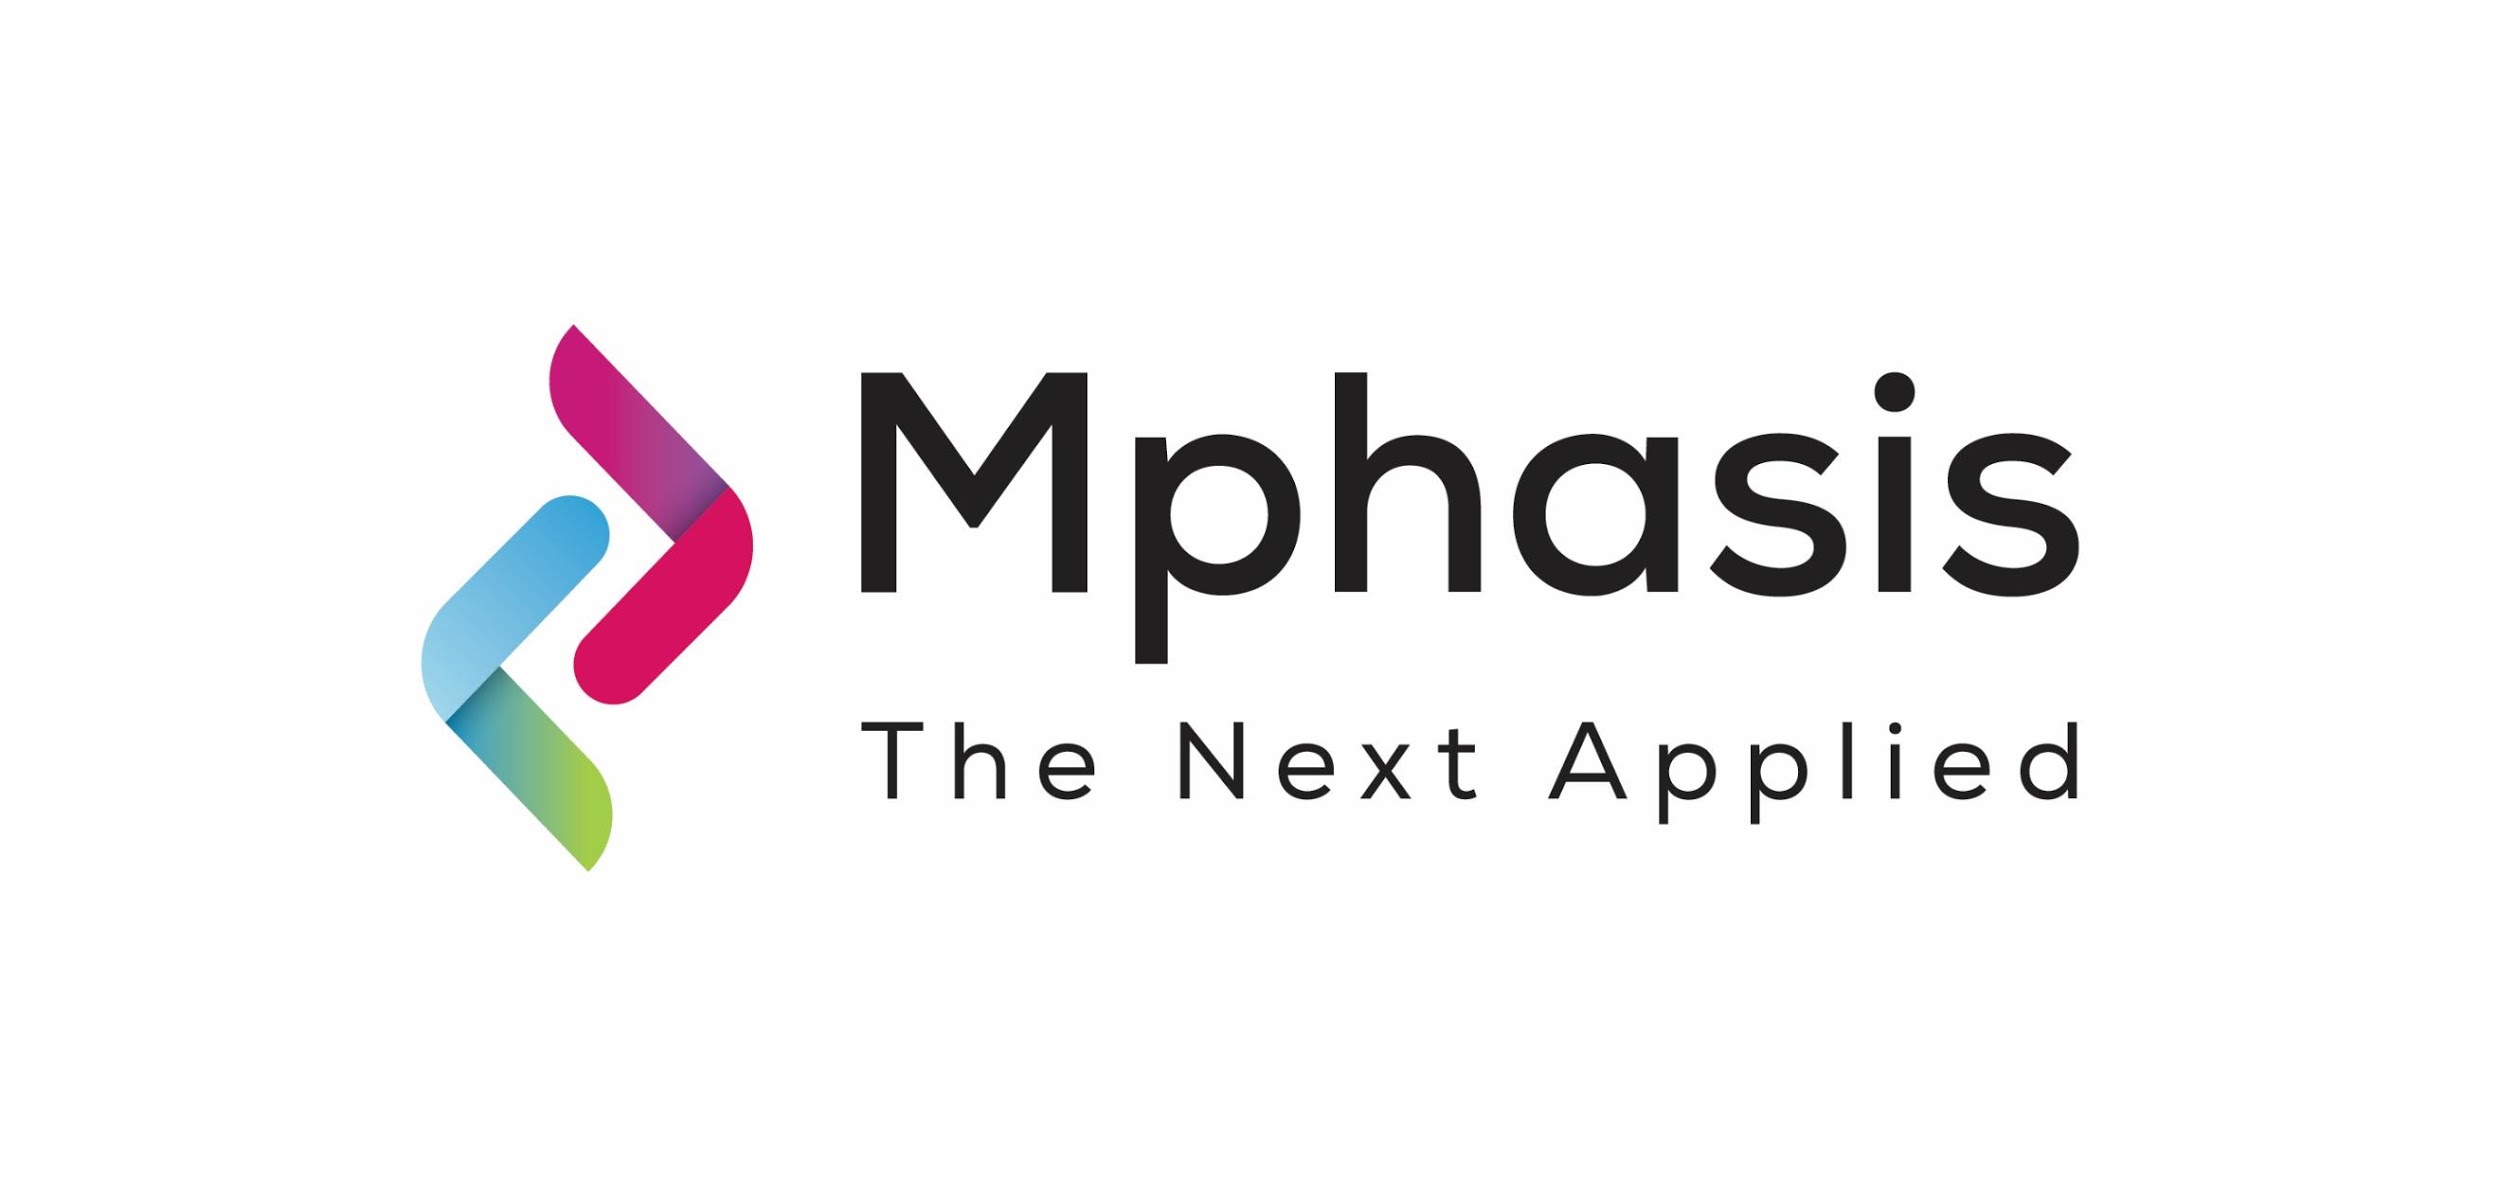 mphasis-announces-expansion-of-its-footprint-with-creation-of-tech-centers-bringing-hundreds-of-jobs-to-mexico-costa-rica-and-taiwan